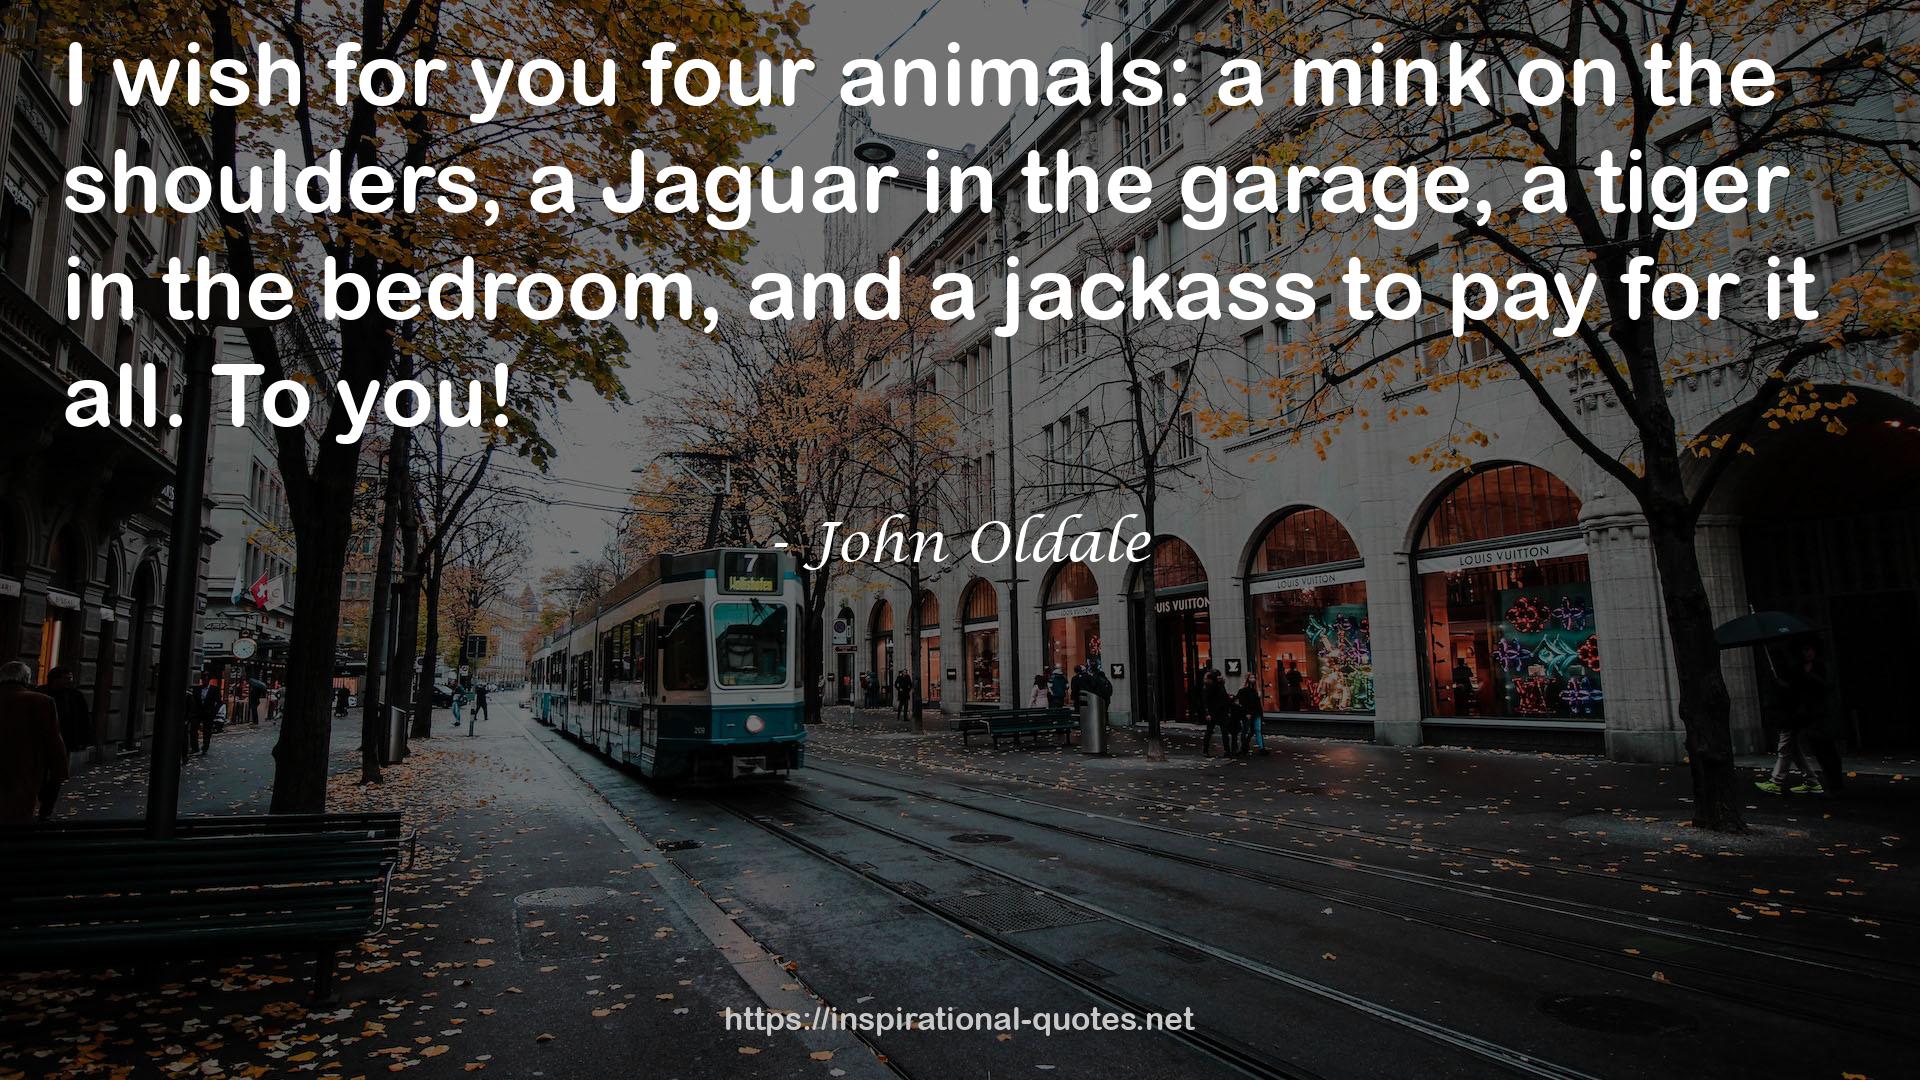 John Oldale QUOTES